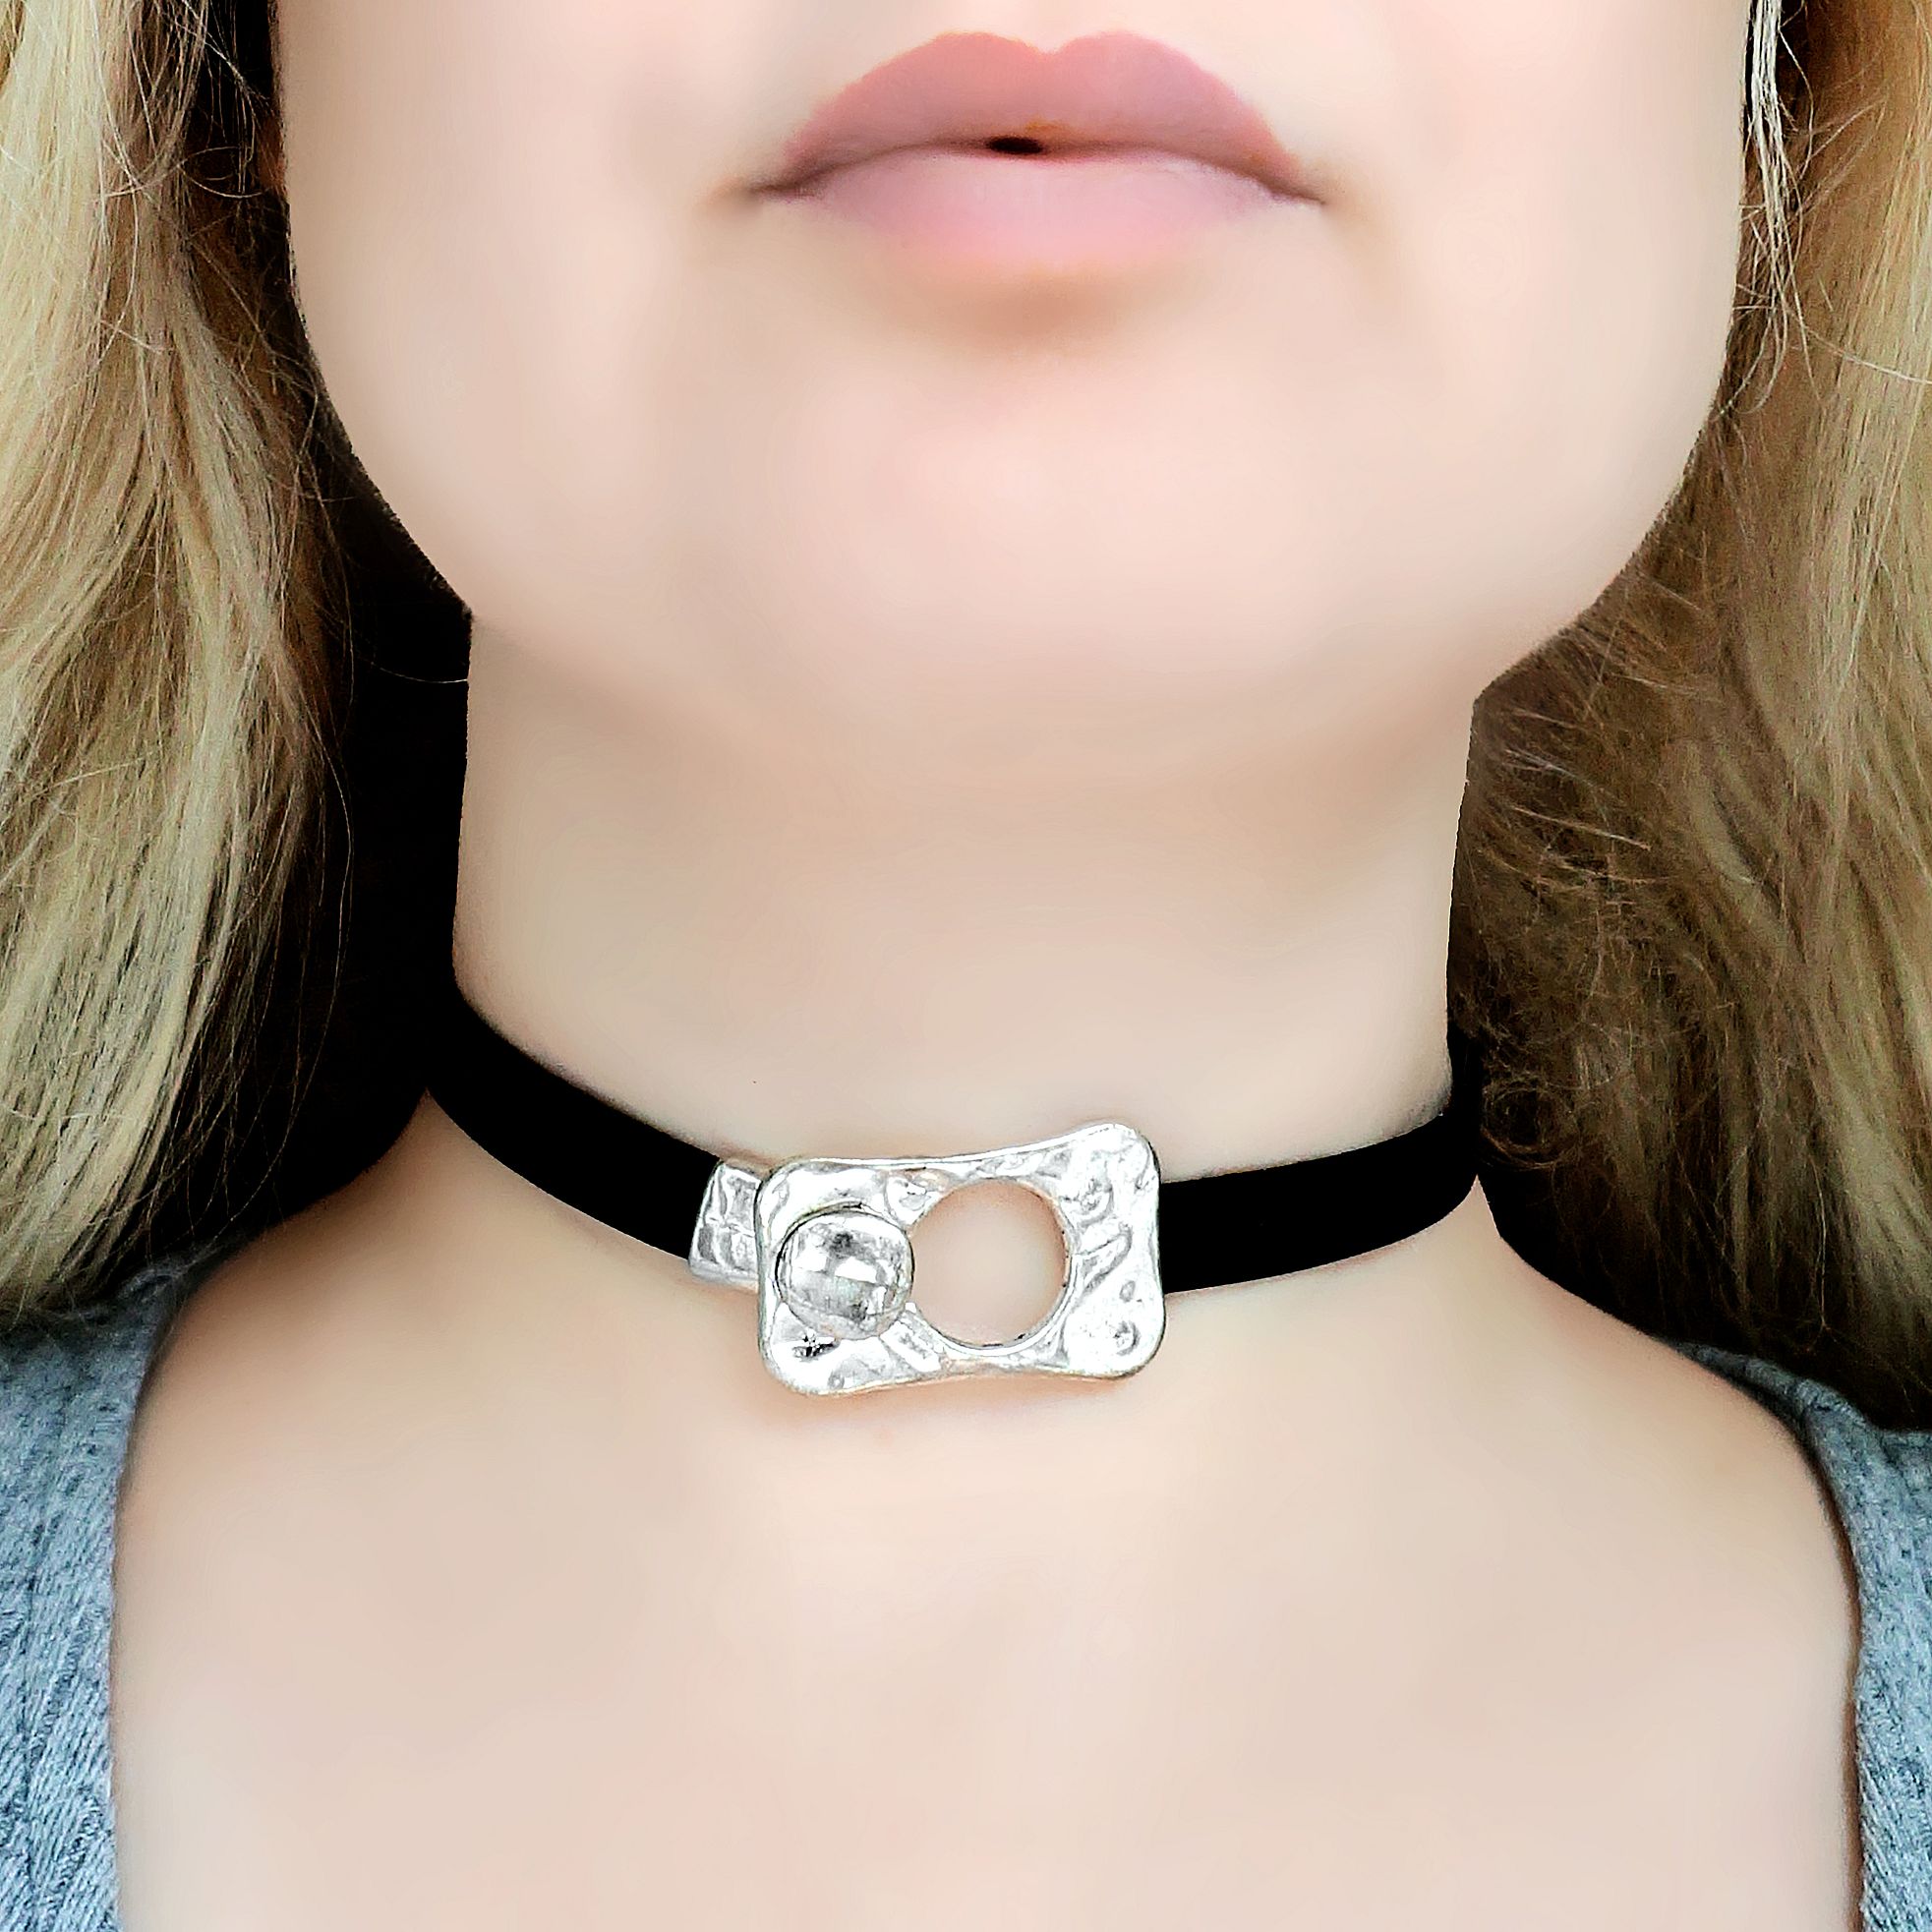 Chain Necklace and Heart Padlock Day Collar Day collar bdsm jewelry ddlg collar  jewelry heart lock necklace collar choker jewelry discreet day collar – VP  Leather